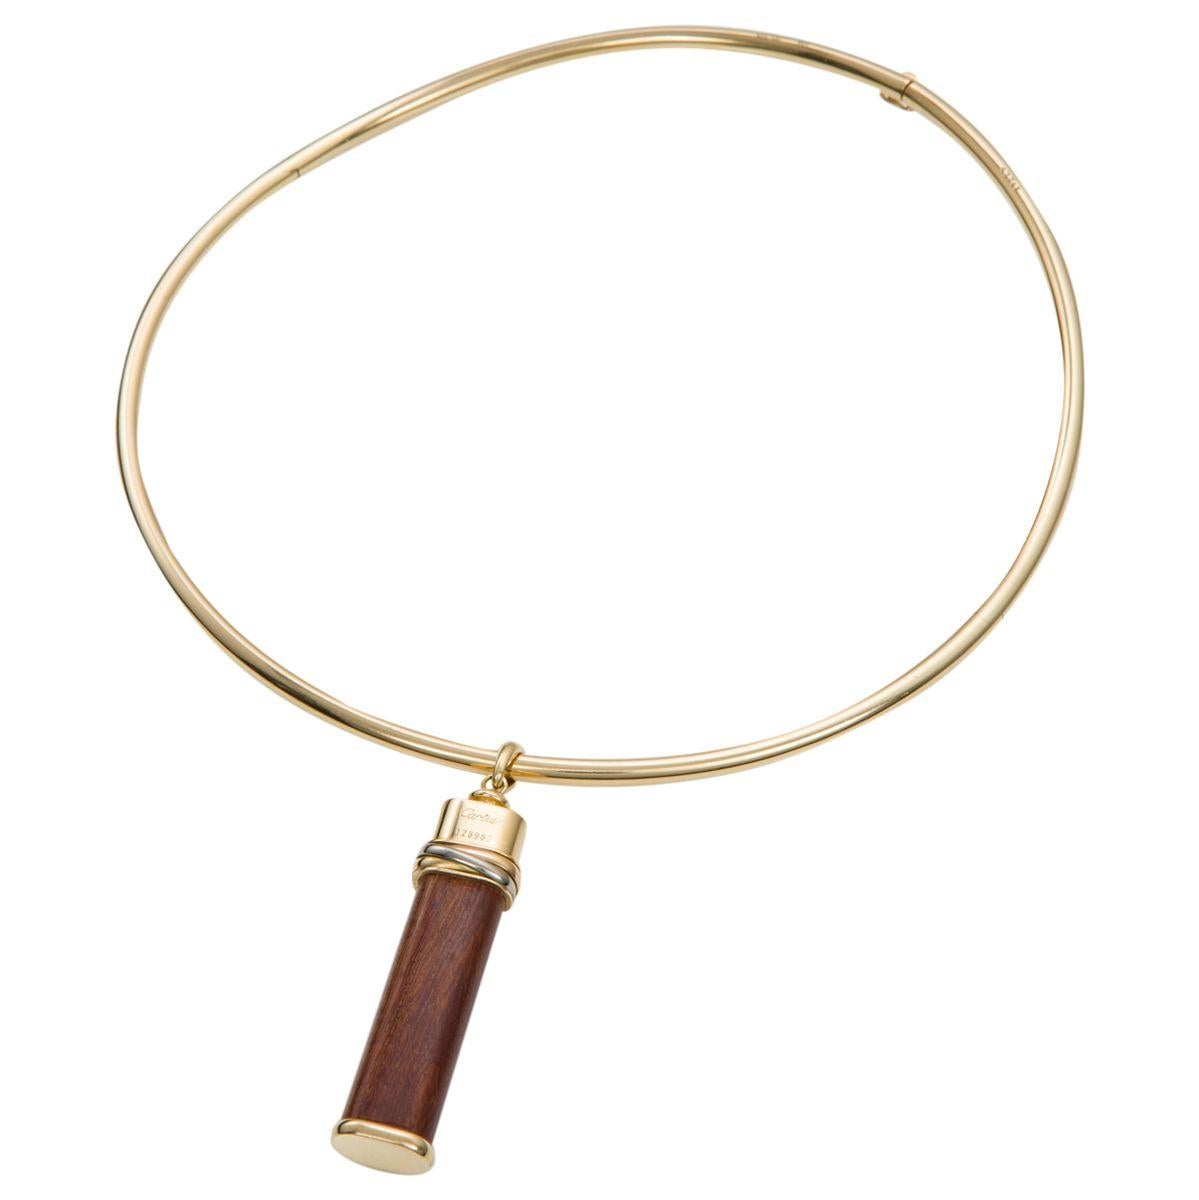 Ever so chic and timeless, like all Cartier jewels which are designed to transcend eras, years and generations. This elegant Cartier 18k yellow gold Toucher de Bois (known as Knock on Wood) pendant and collar are a wonderful combination. The